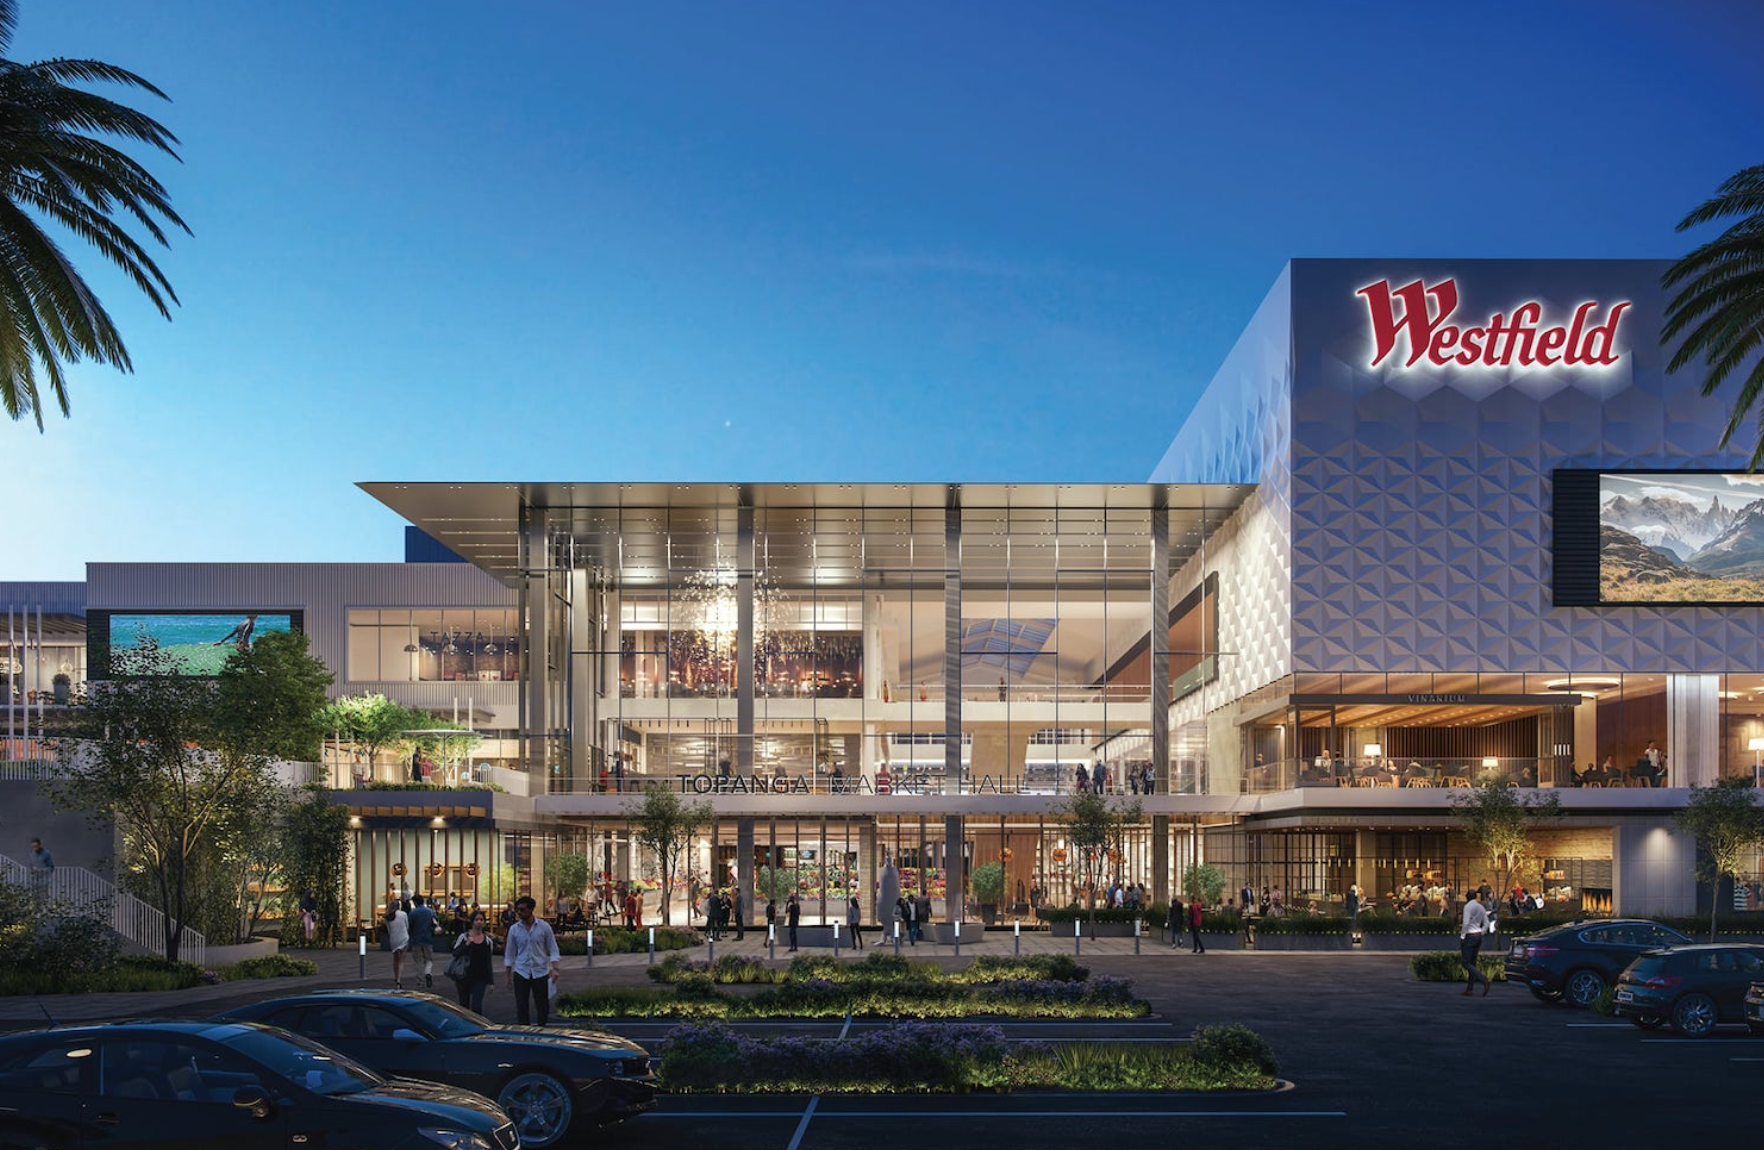 What's Going On With Westfield Massive Topanga Project?